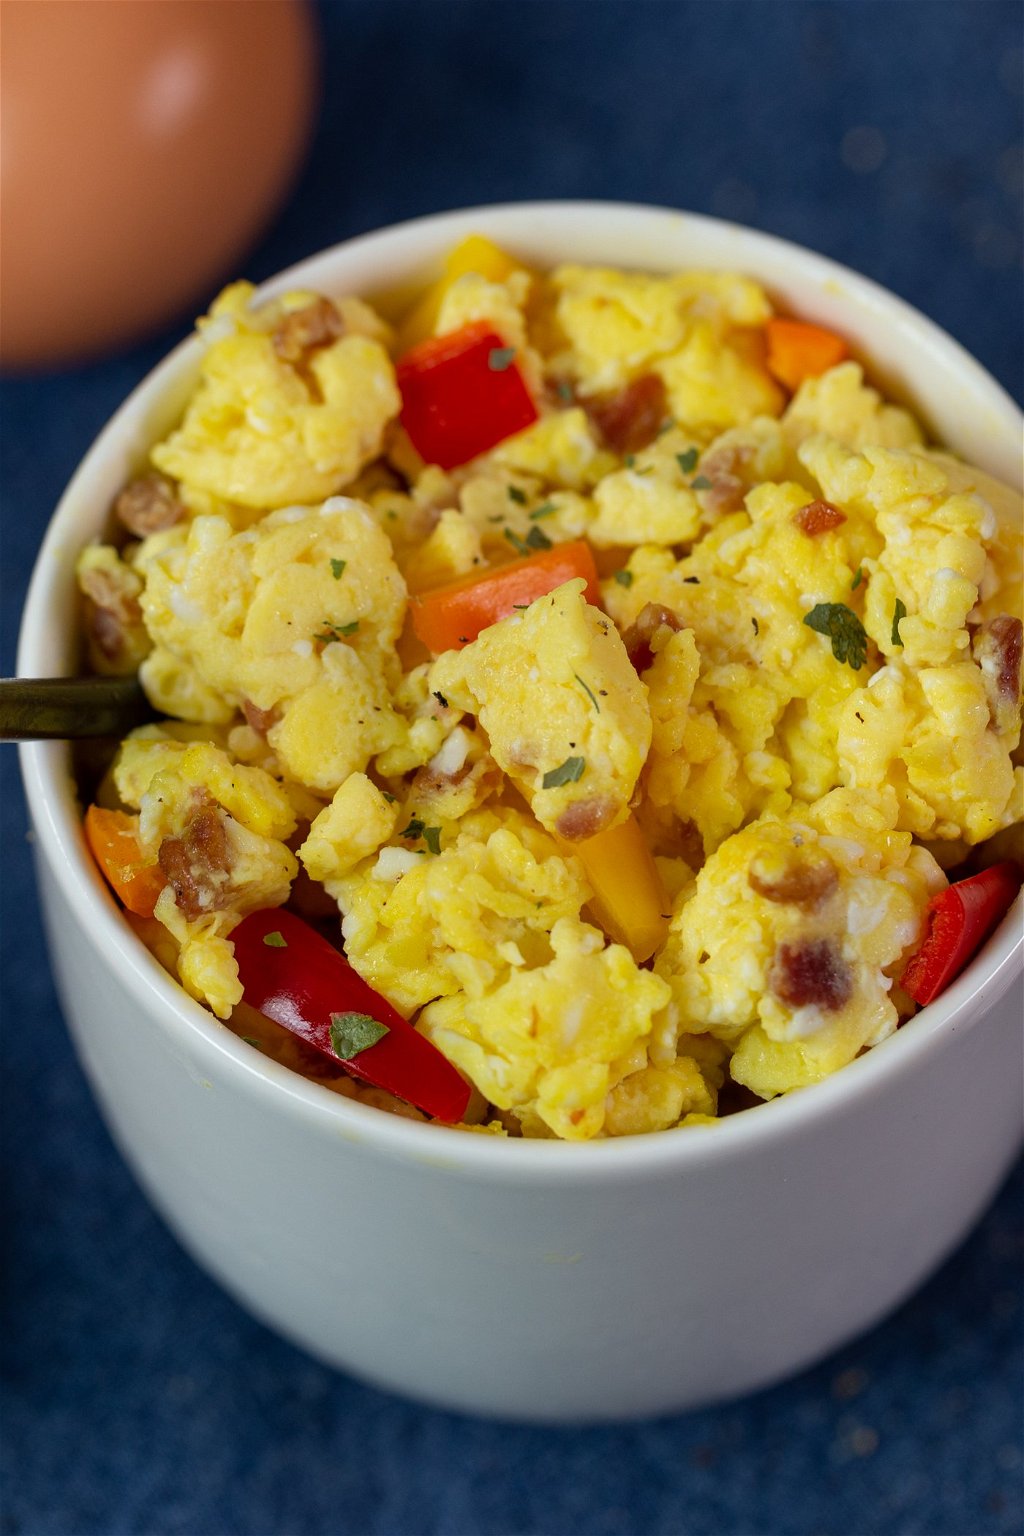 https://media.theproteinchef.co/wp-content/uploads/2020/08/Microwave-Scrambled-Eggs-in-a-Mug-Recipe.jpg